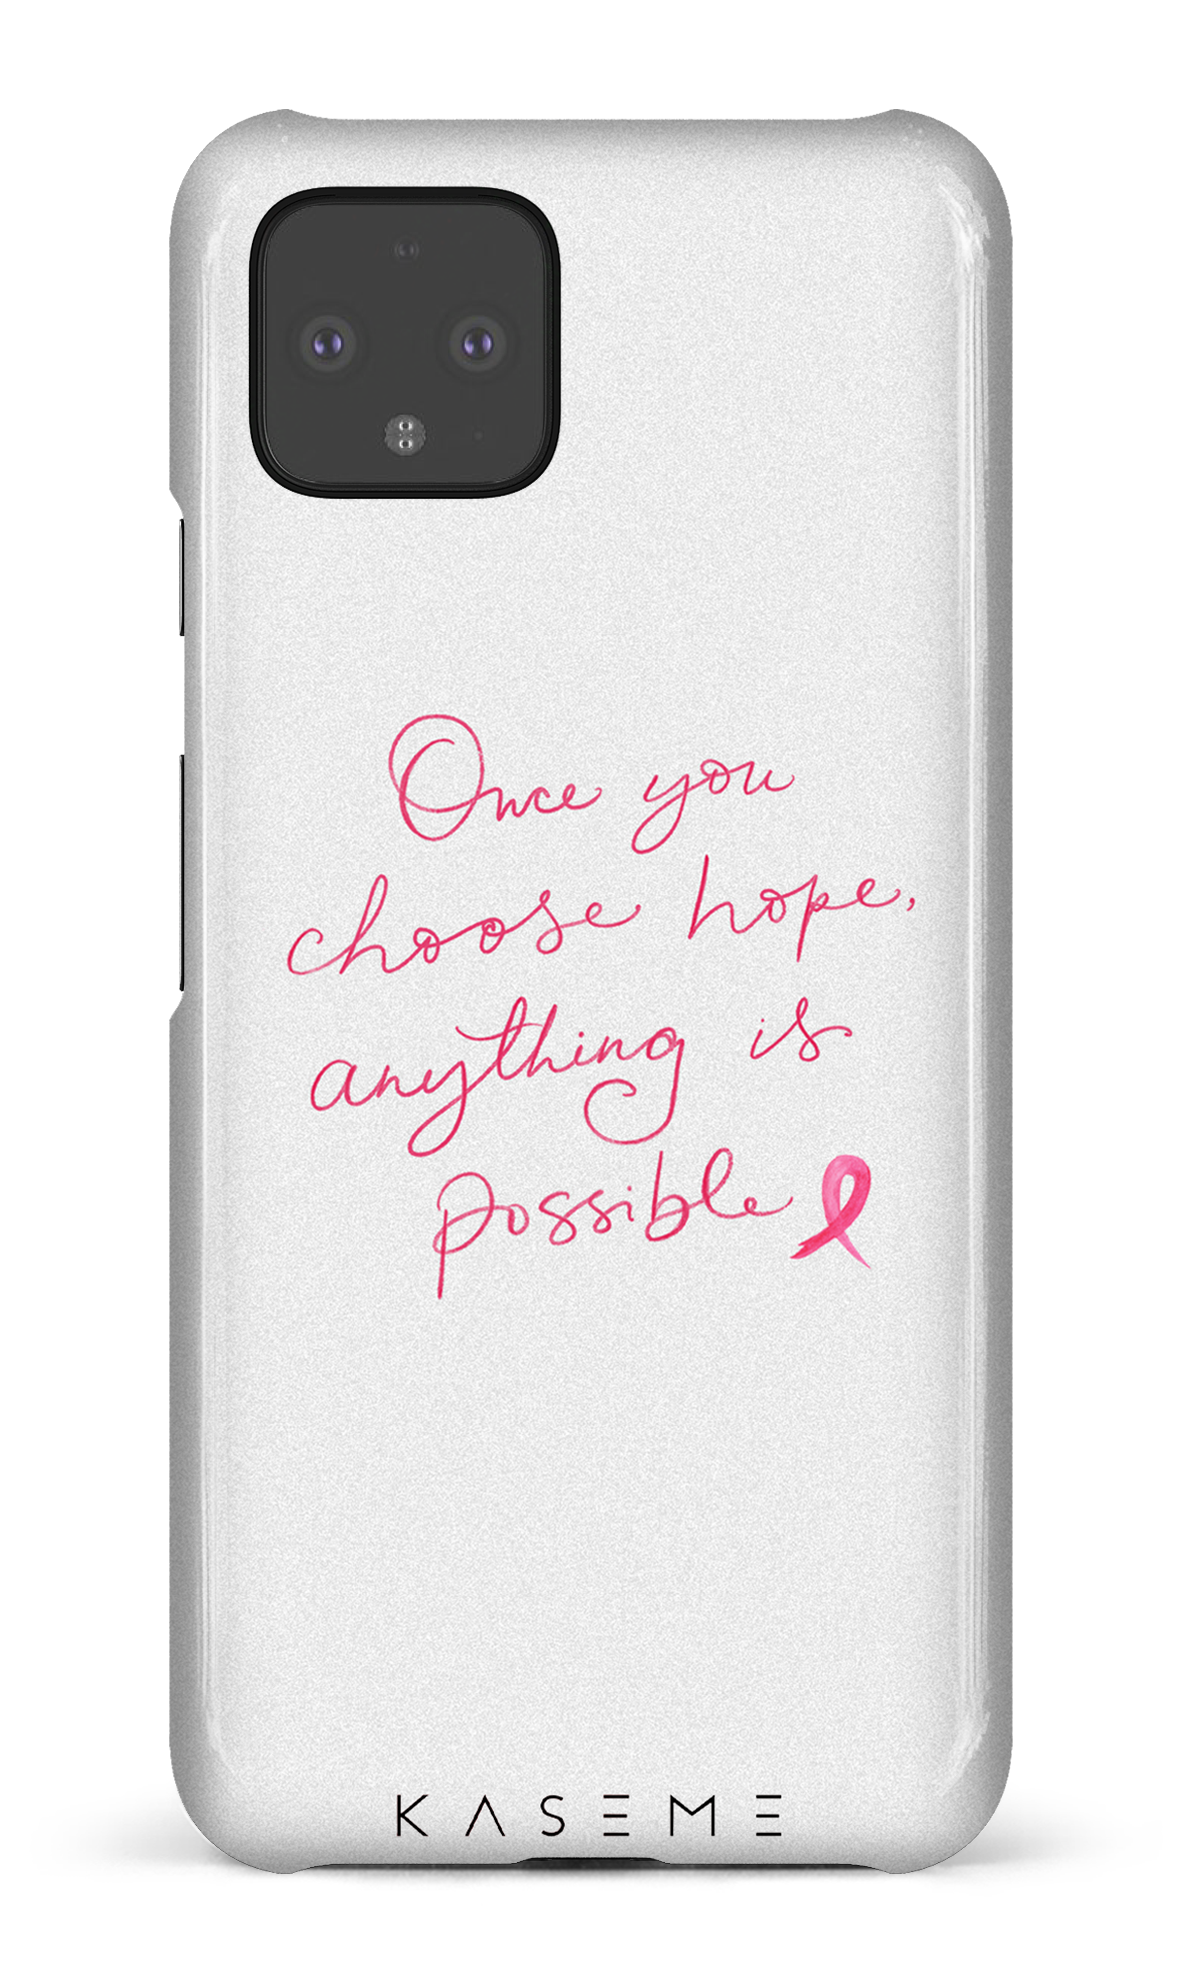 Hope by Canadian Cancer Society - Google Pixel 4